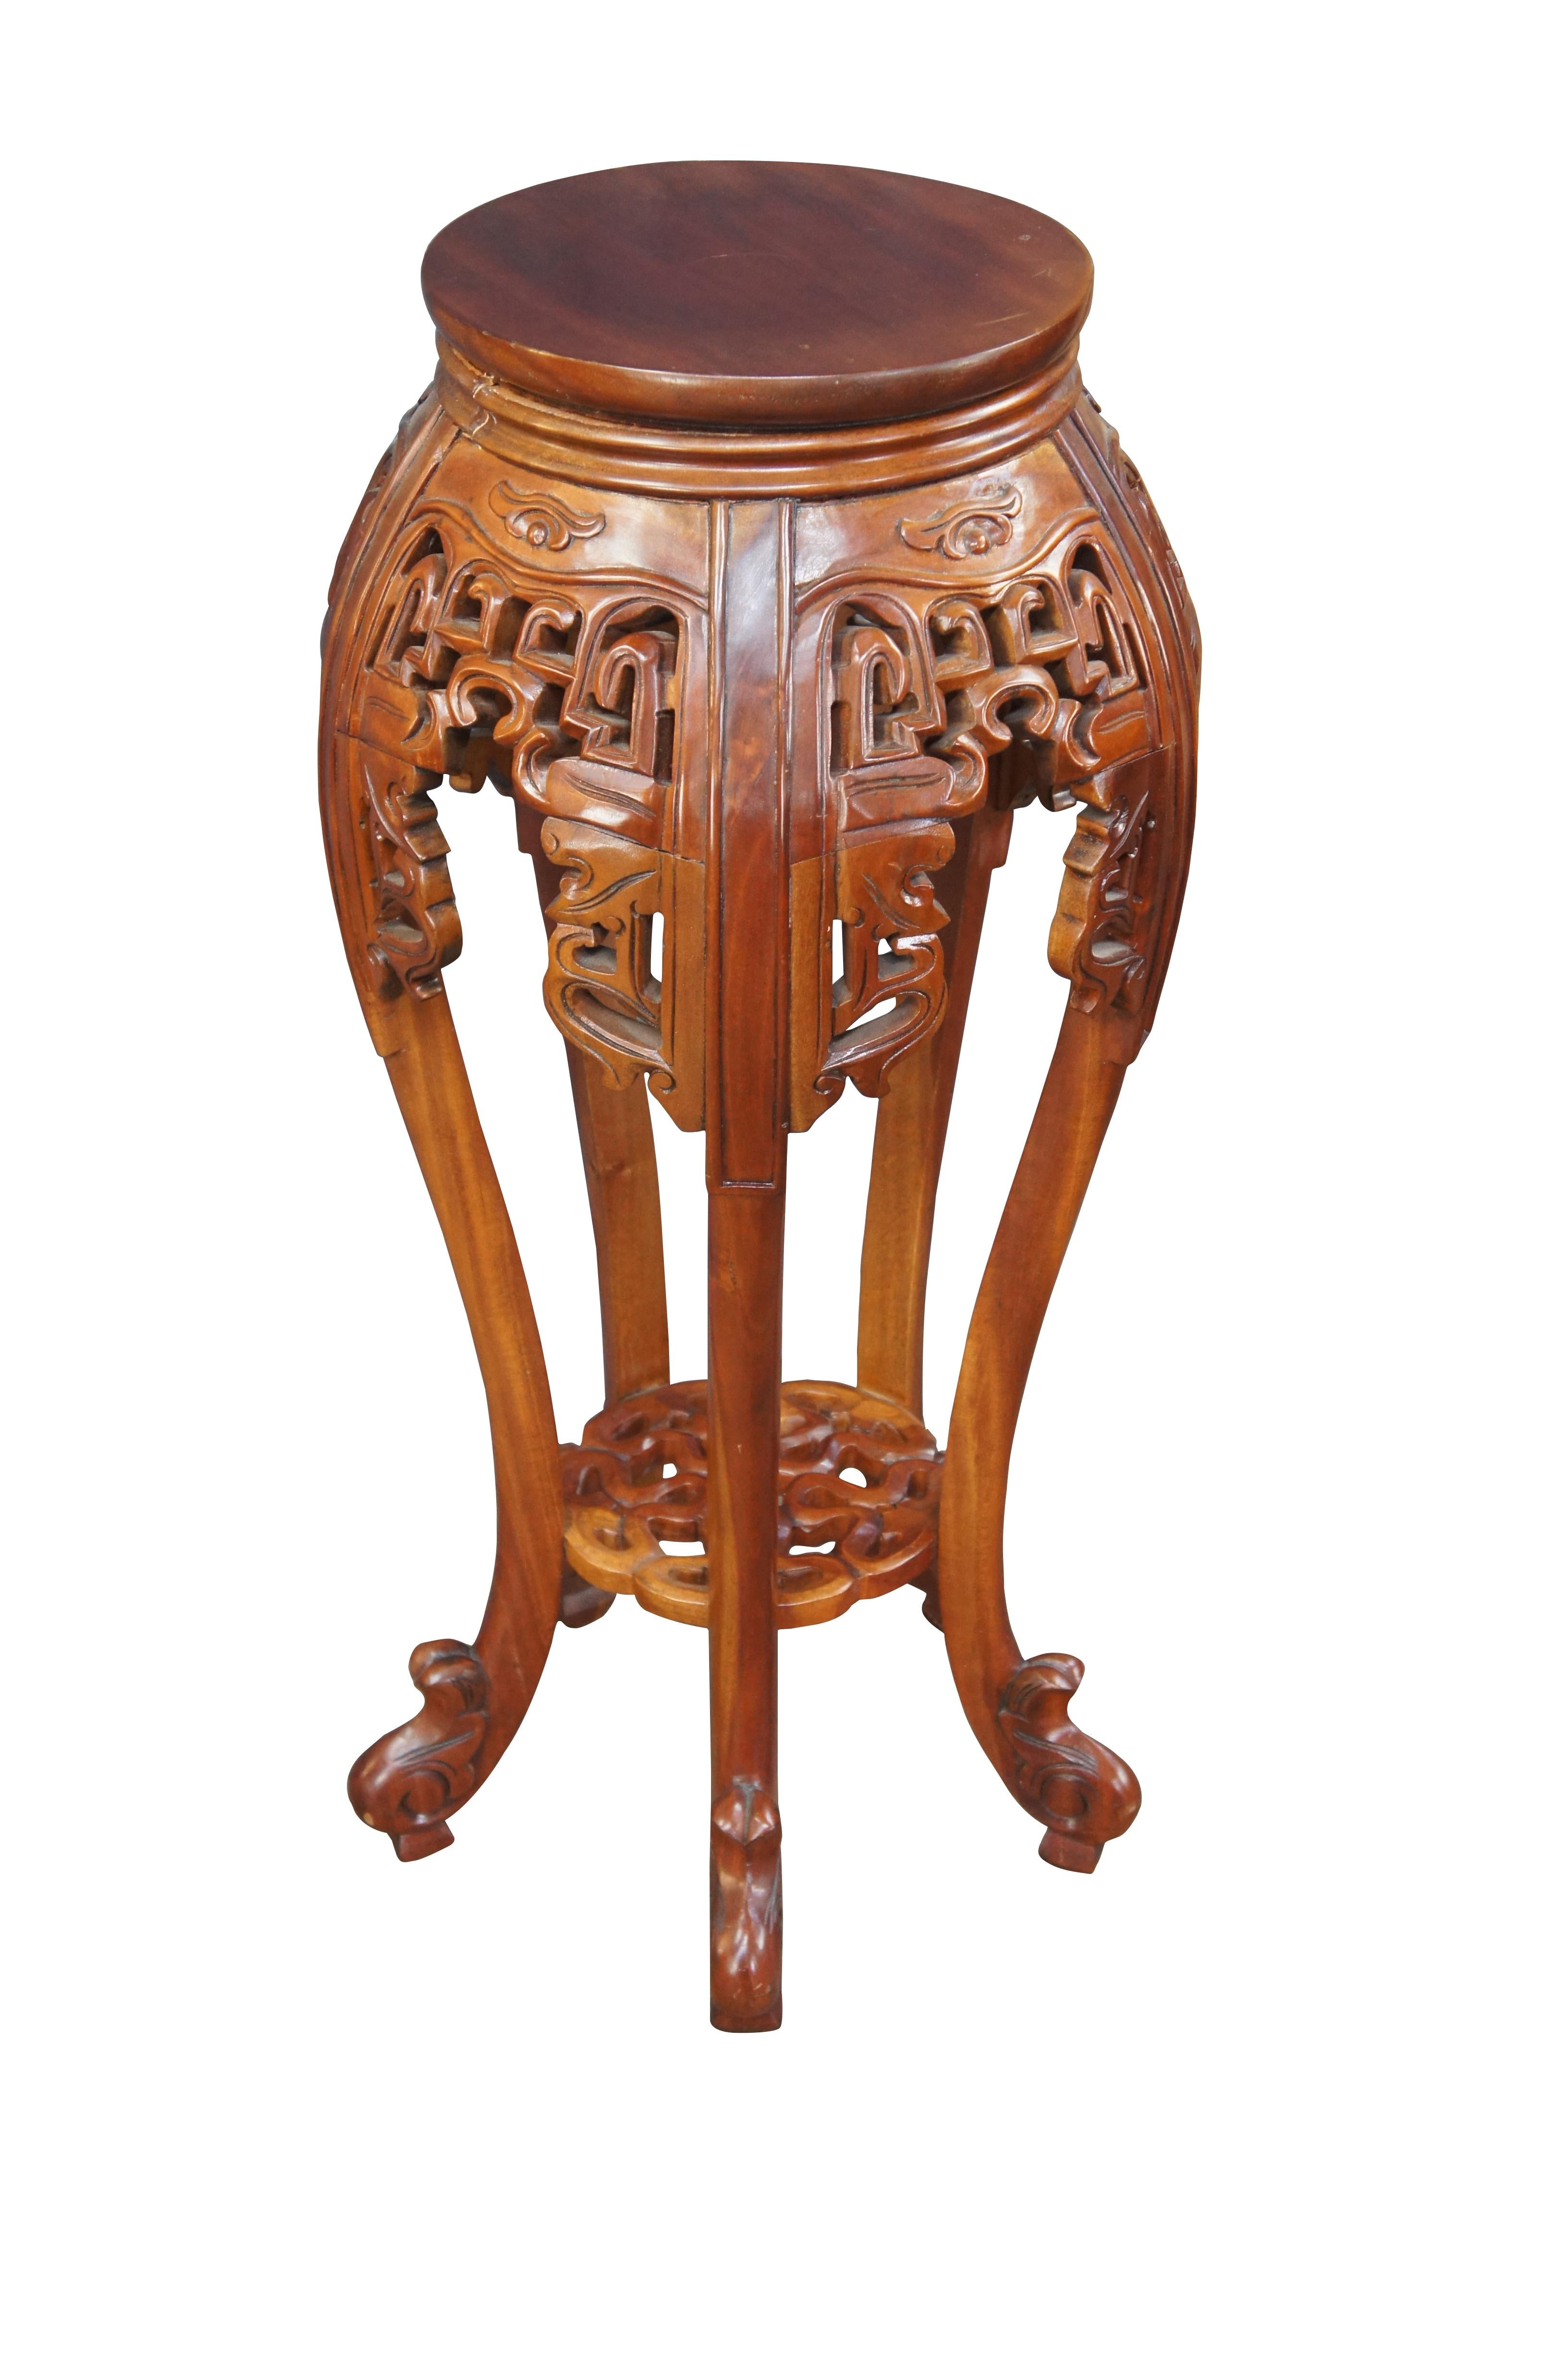 Mahogany carved Chinoiserie fern stand, circa last quarter 20th century. Features a solid wood construction with long contoured legs, pierced fretwork, a lower geometric shelf and scrolled feet.

Dimensions:
15.5